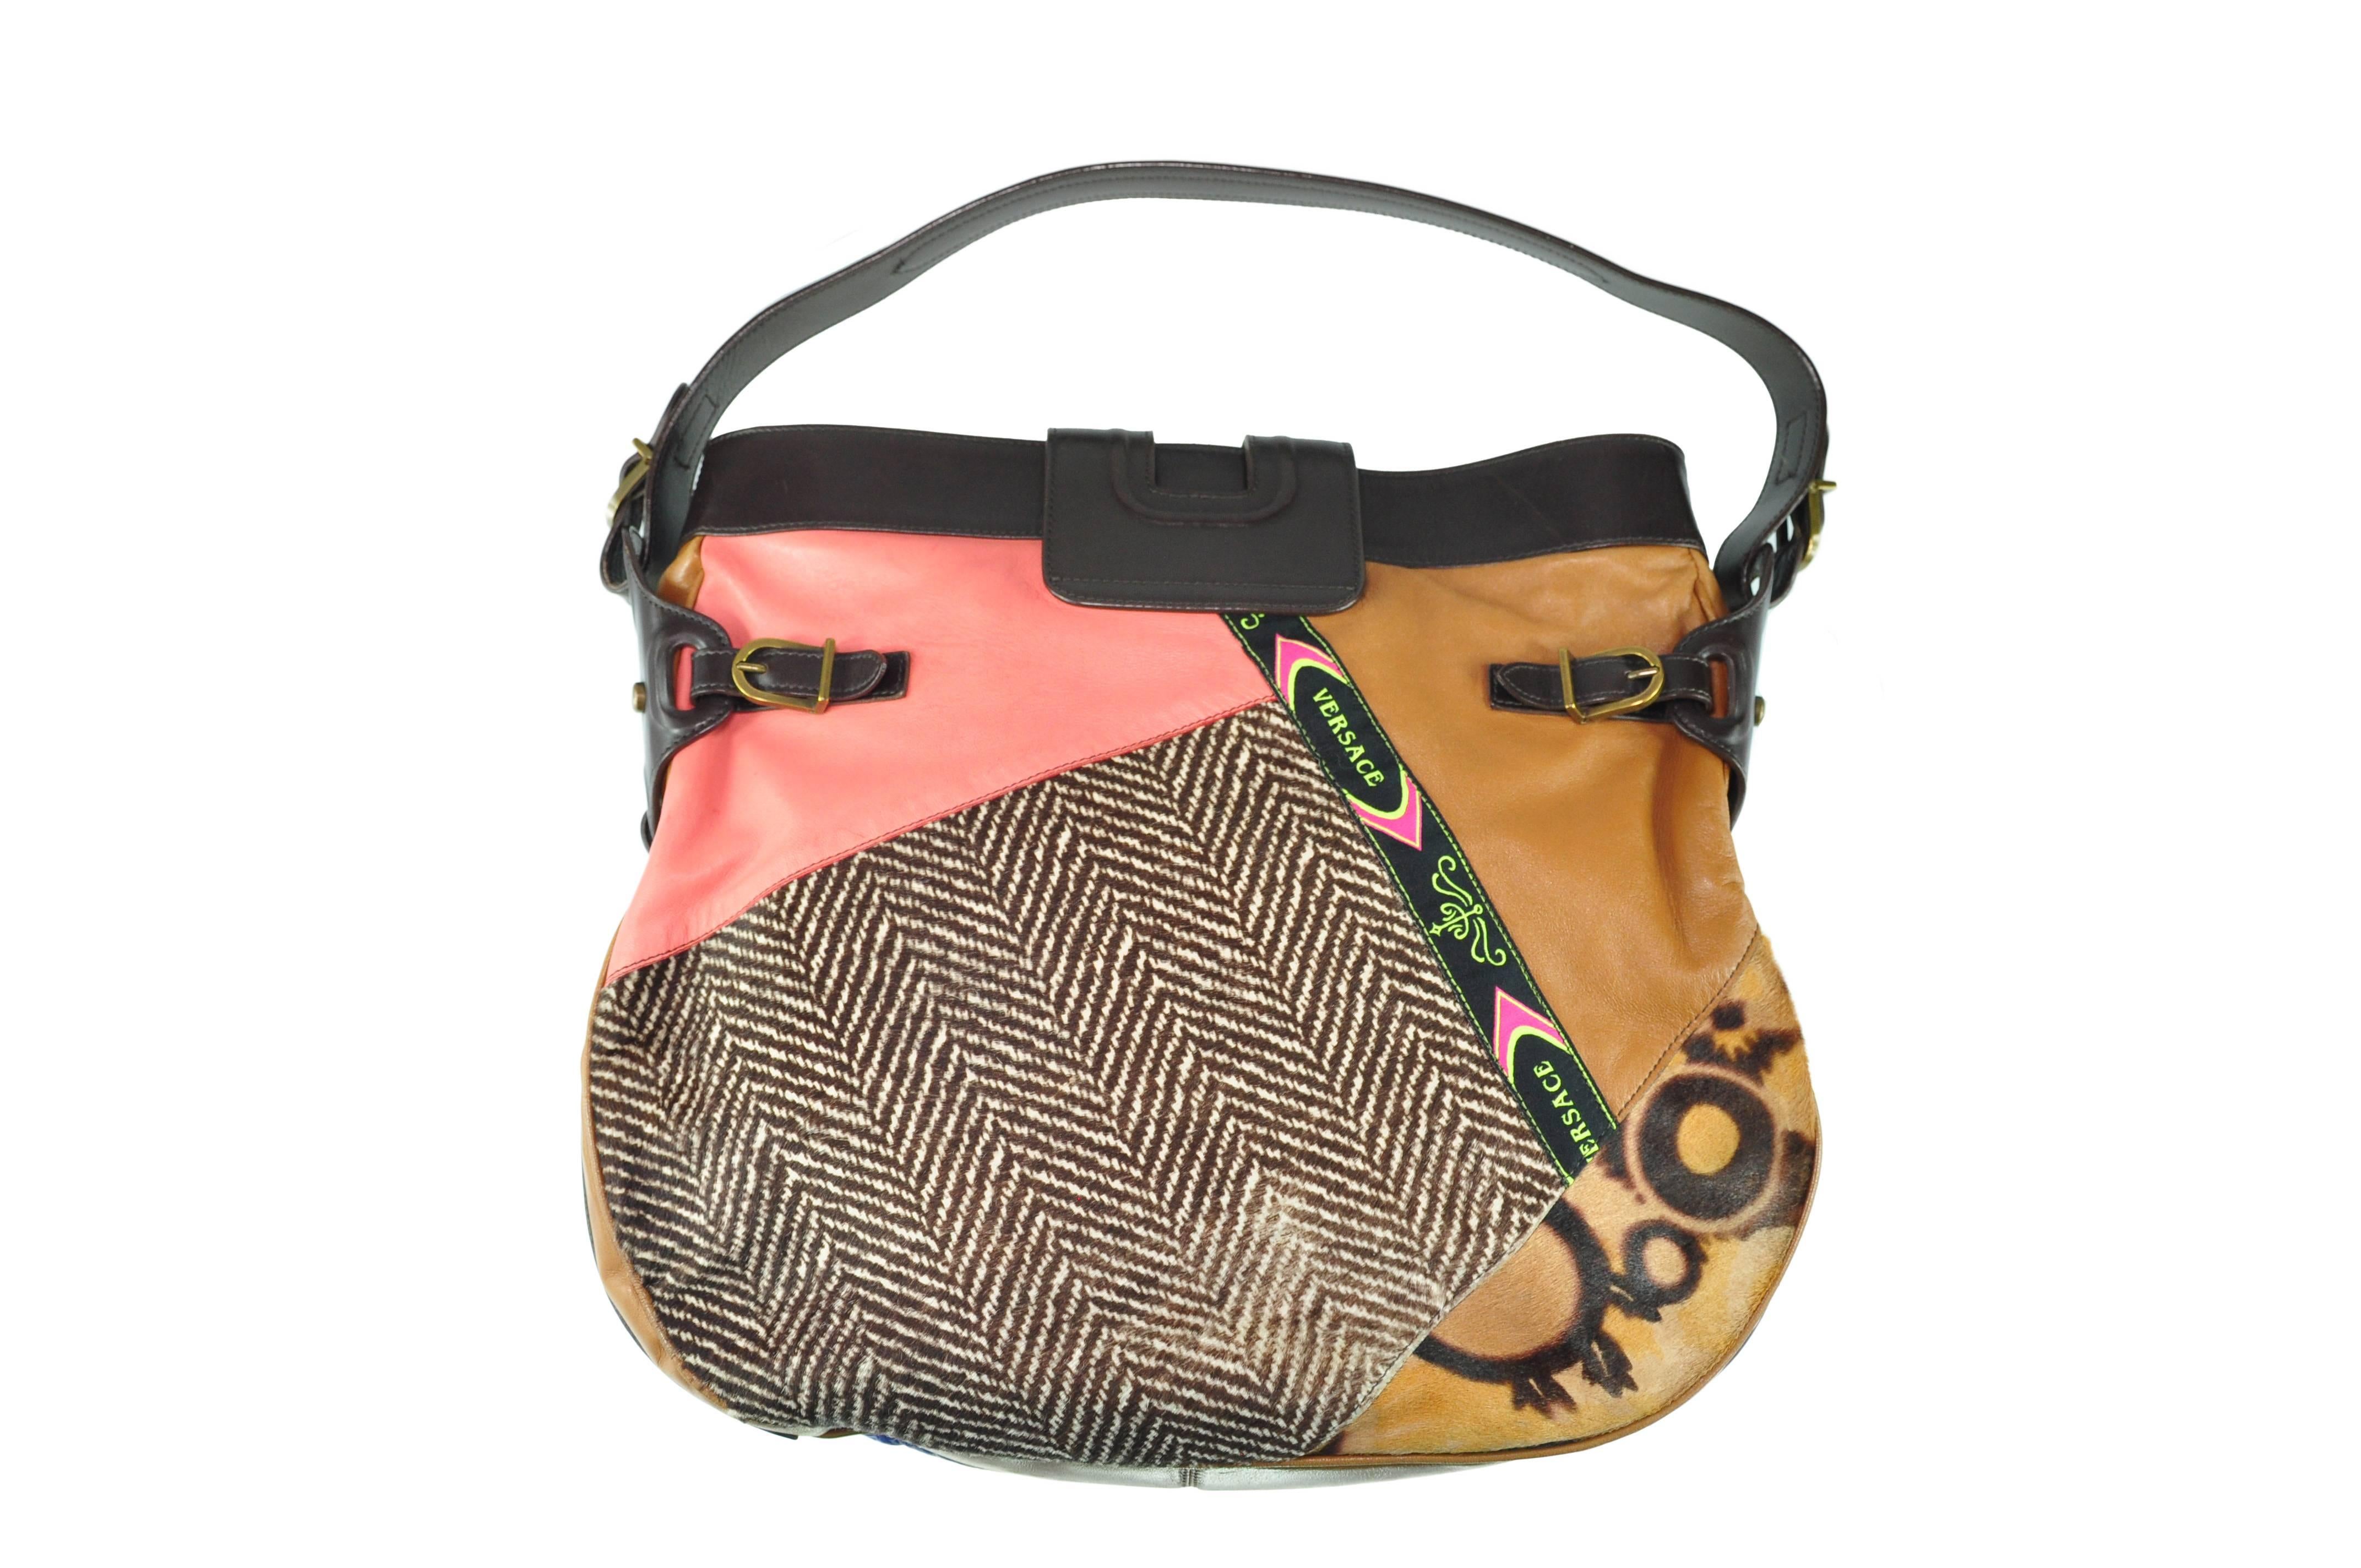 A rare and beautiful crafted patchwork shoulder bag from Gianni Versace in the 90's, the patchwork is combination of animal printed on cowhide skin, suede eyelets, eel skin. Leather buckle on top with a snap closure.  Single leather shoulder strap.